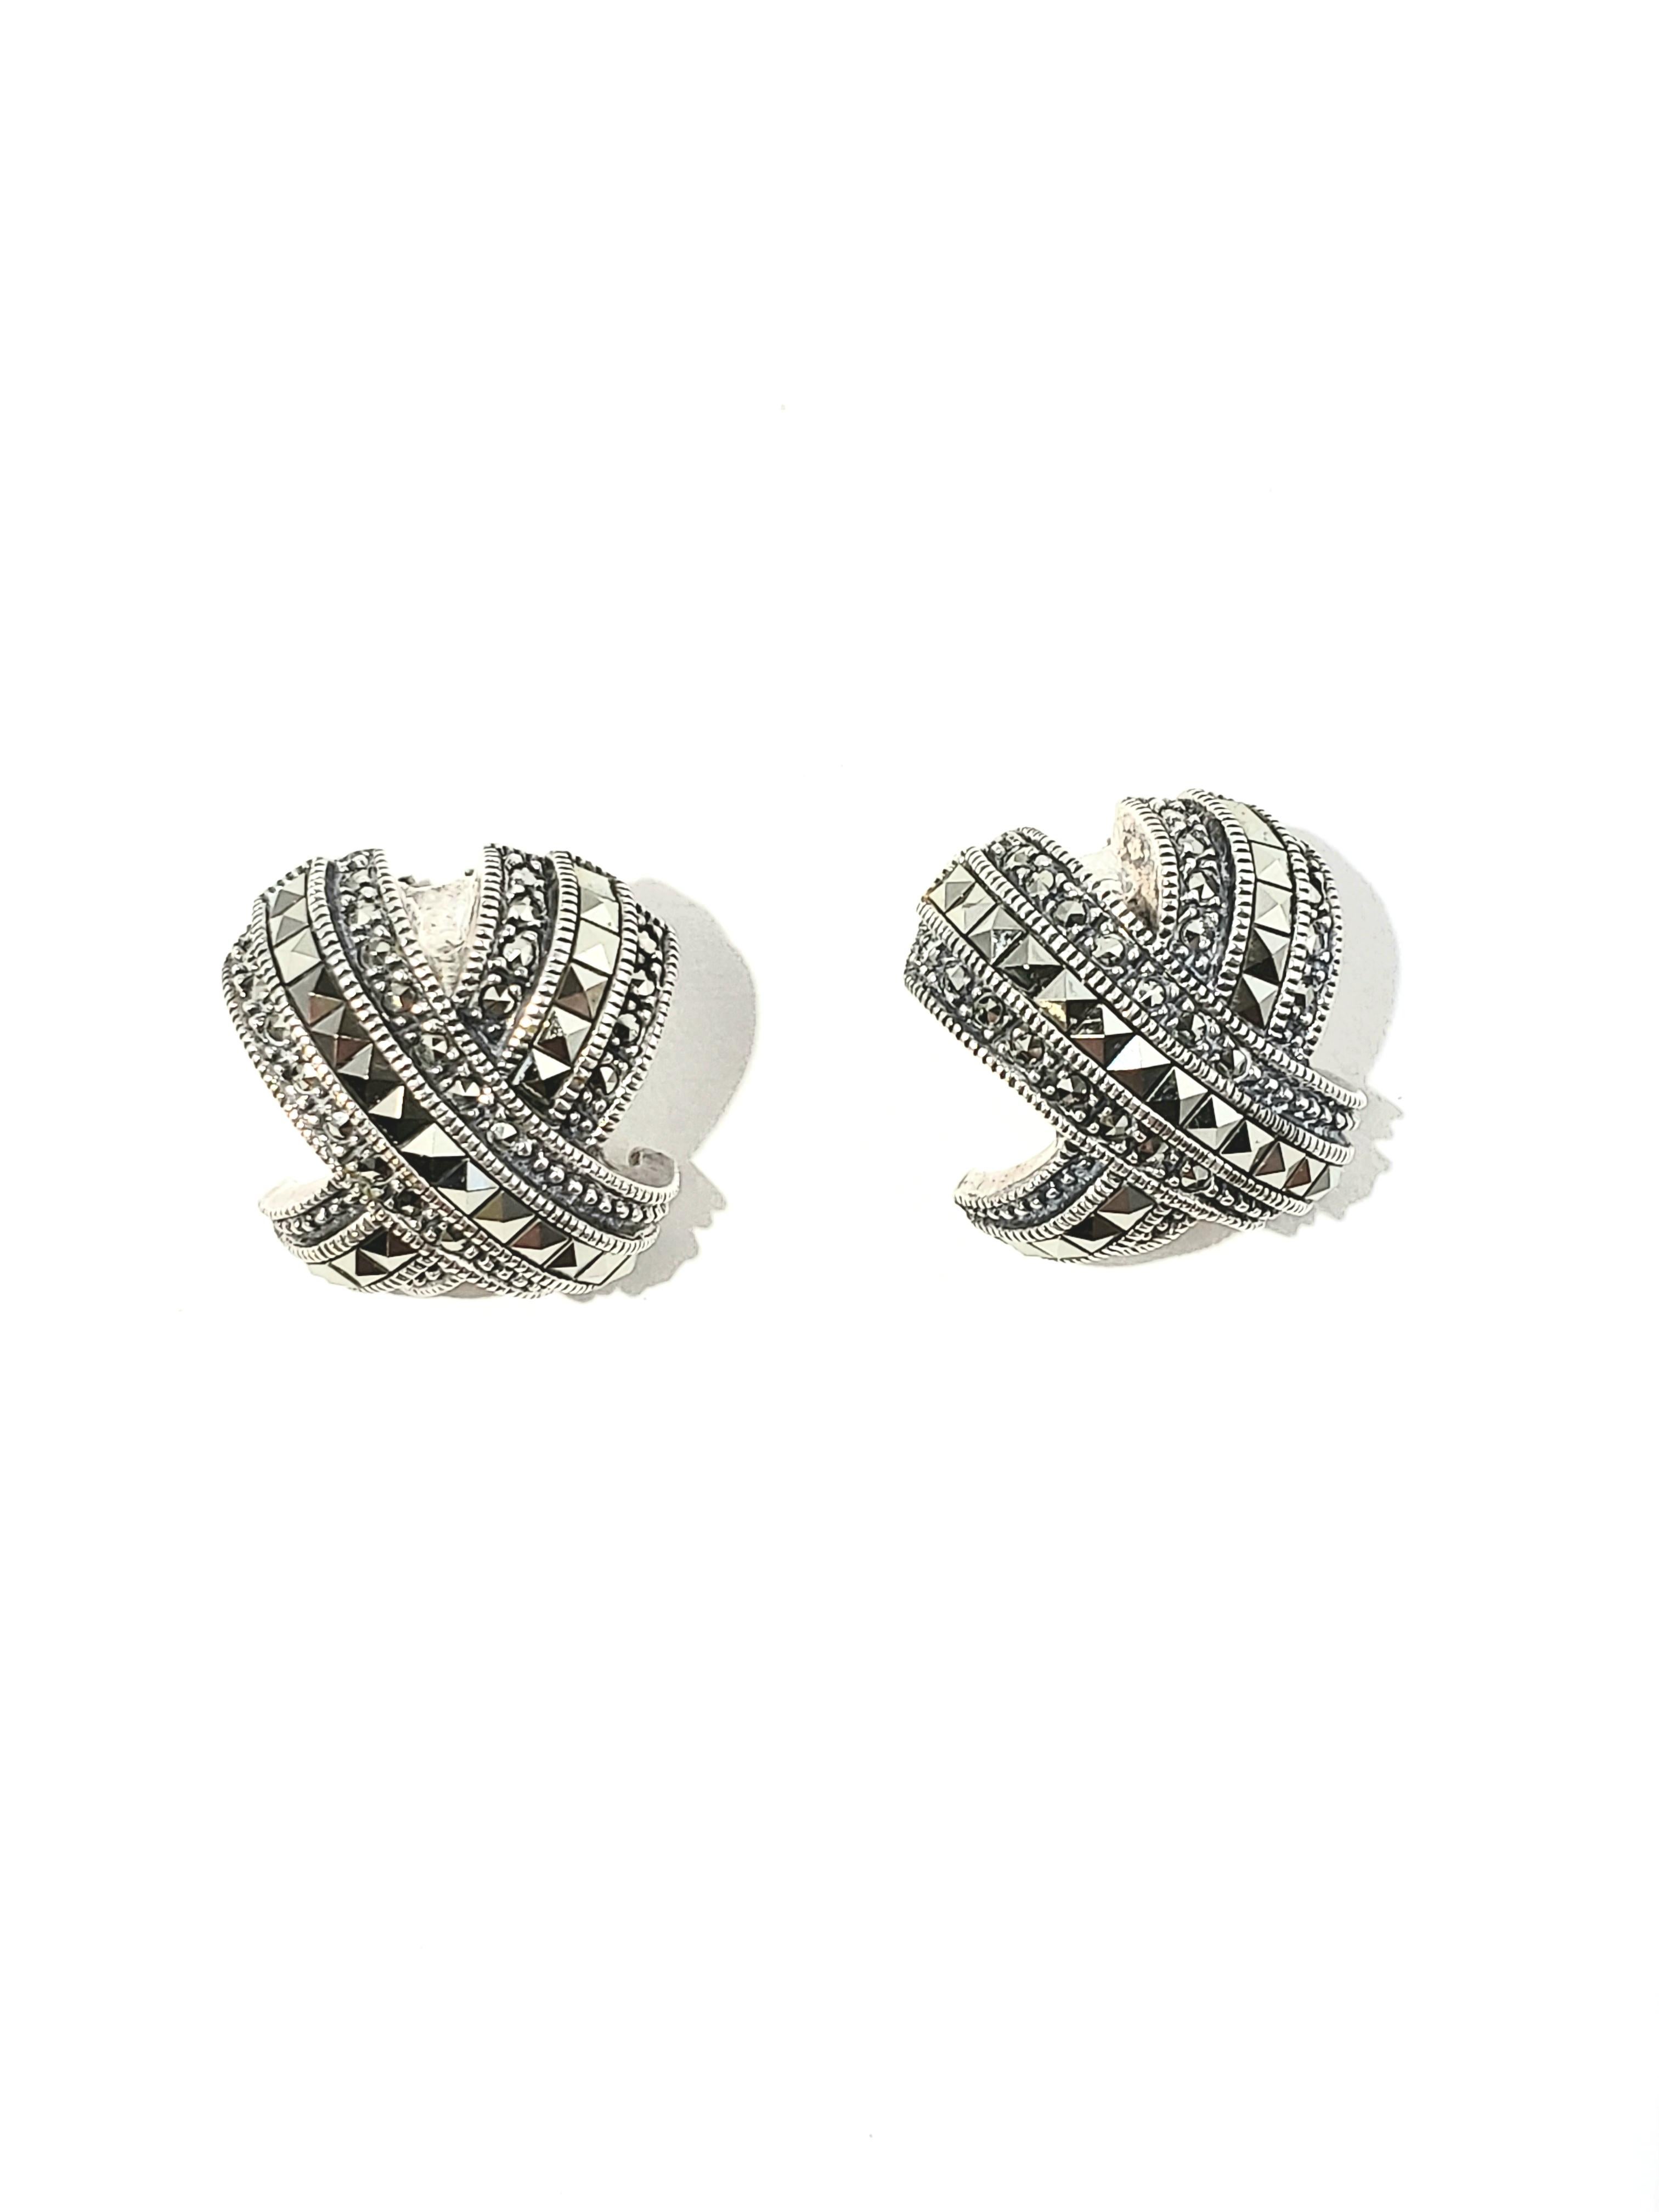 Judith Jack Marcasite Sterling Silver Criss Cross Earrings

This is an elegant pair of curved criss-cross design earrings with marcasite accent stones crafted by Judith Jack in Sterling Silver.

Measurements:     Measures 19mm L x 19mm W.  Measures